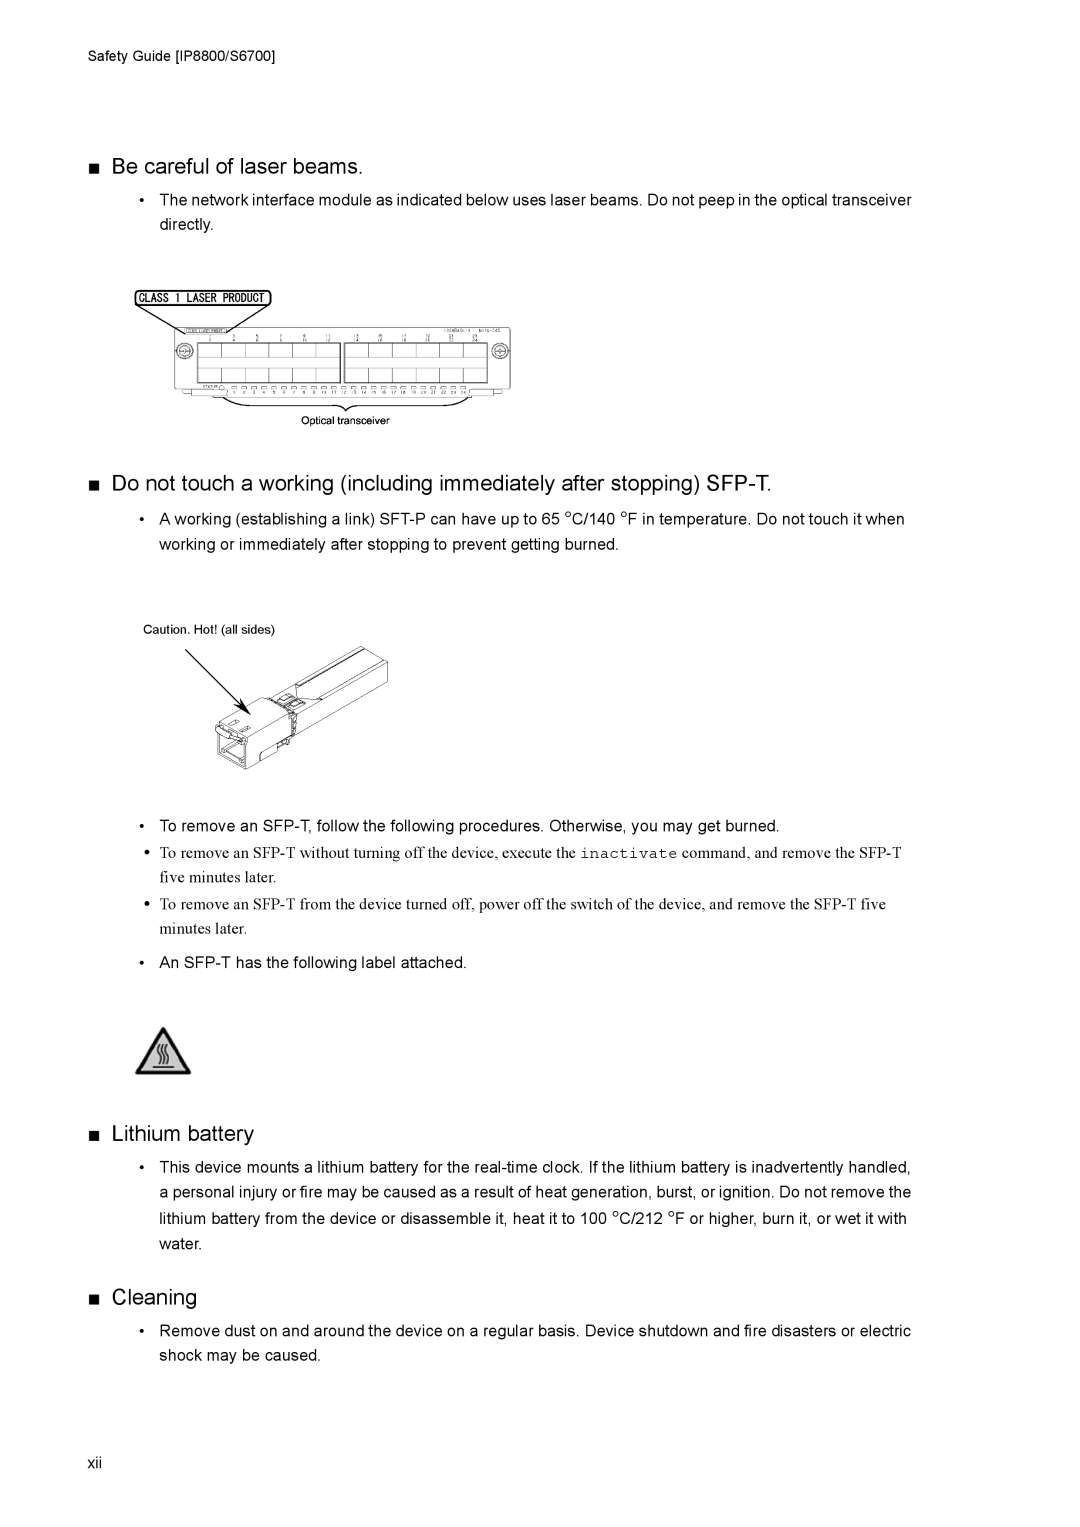 NEC IP8800/S2400 manual Be careful of laser beams, Lithium battery, Cleaning, An SFP-T has the following label attached 